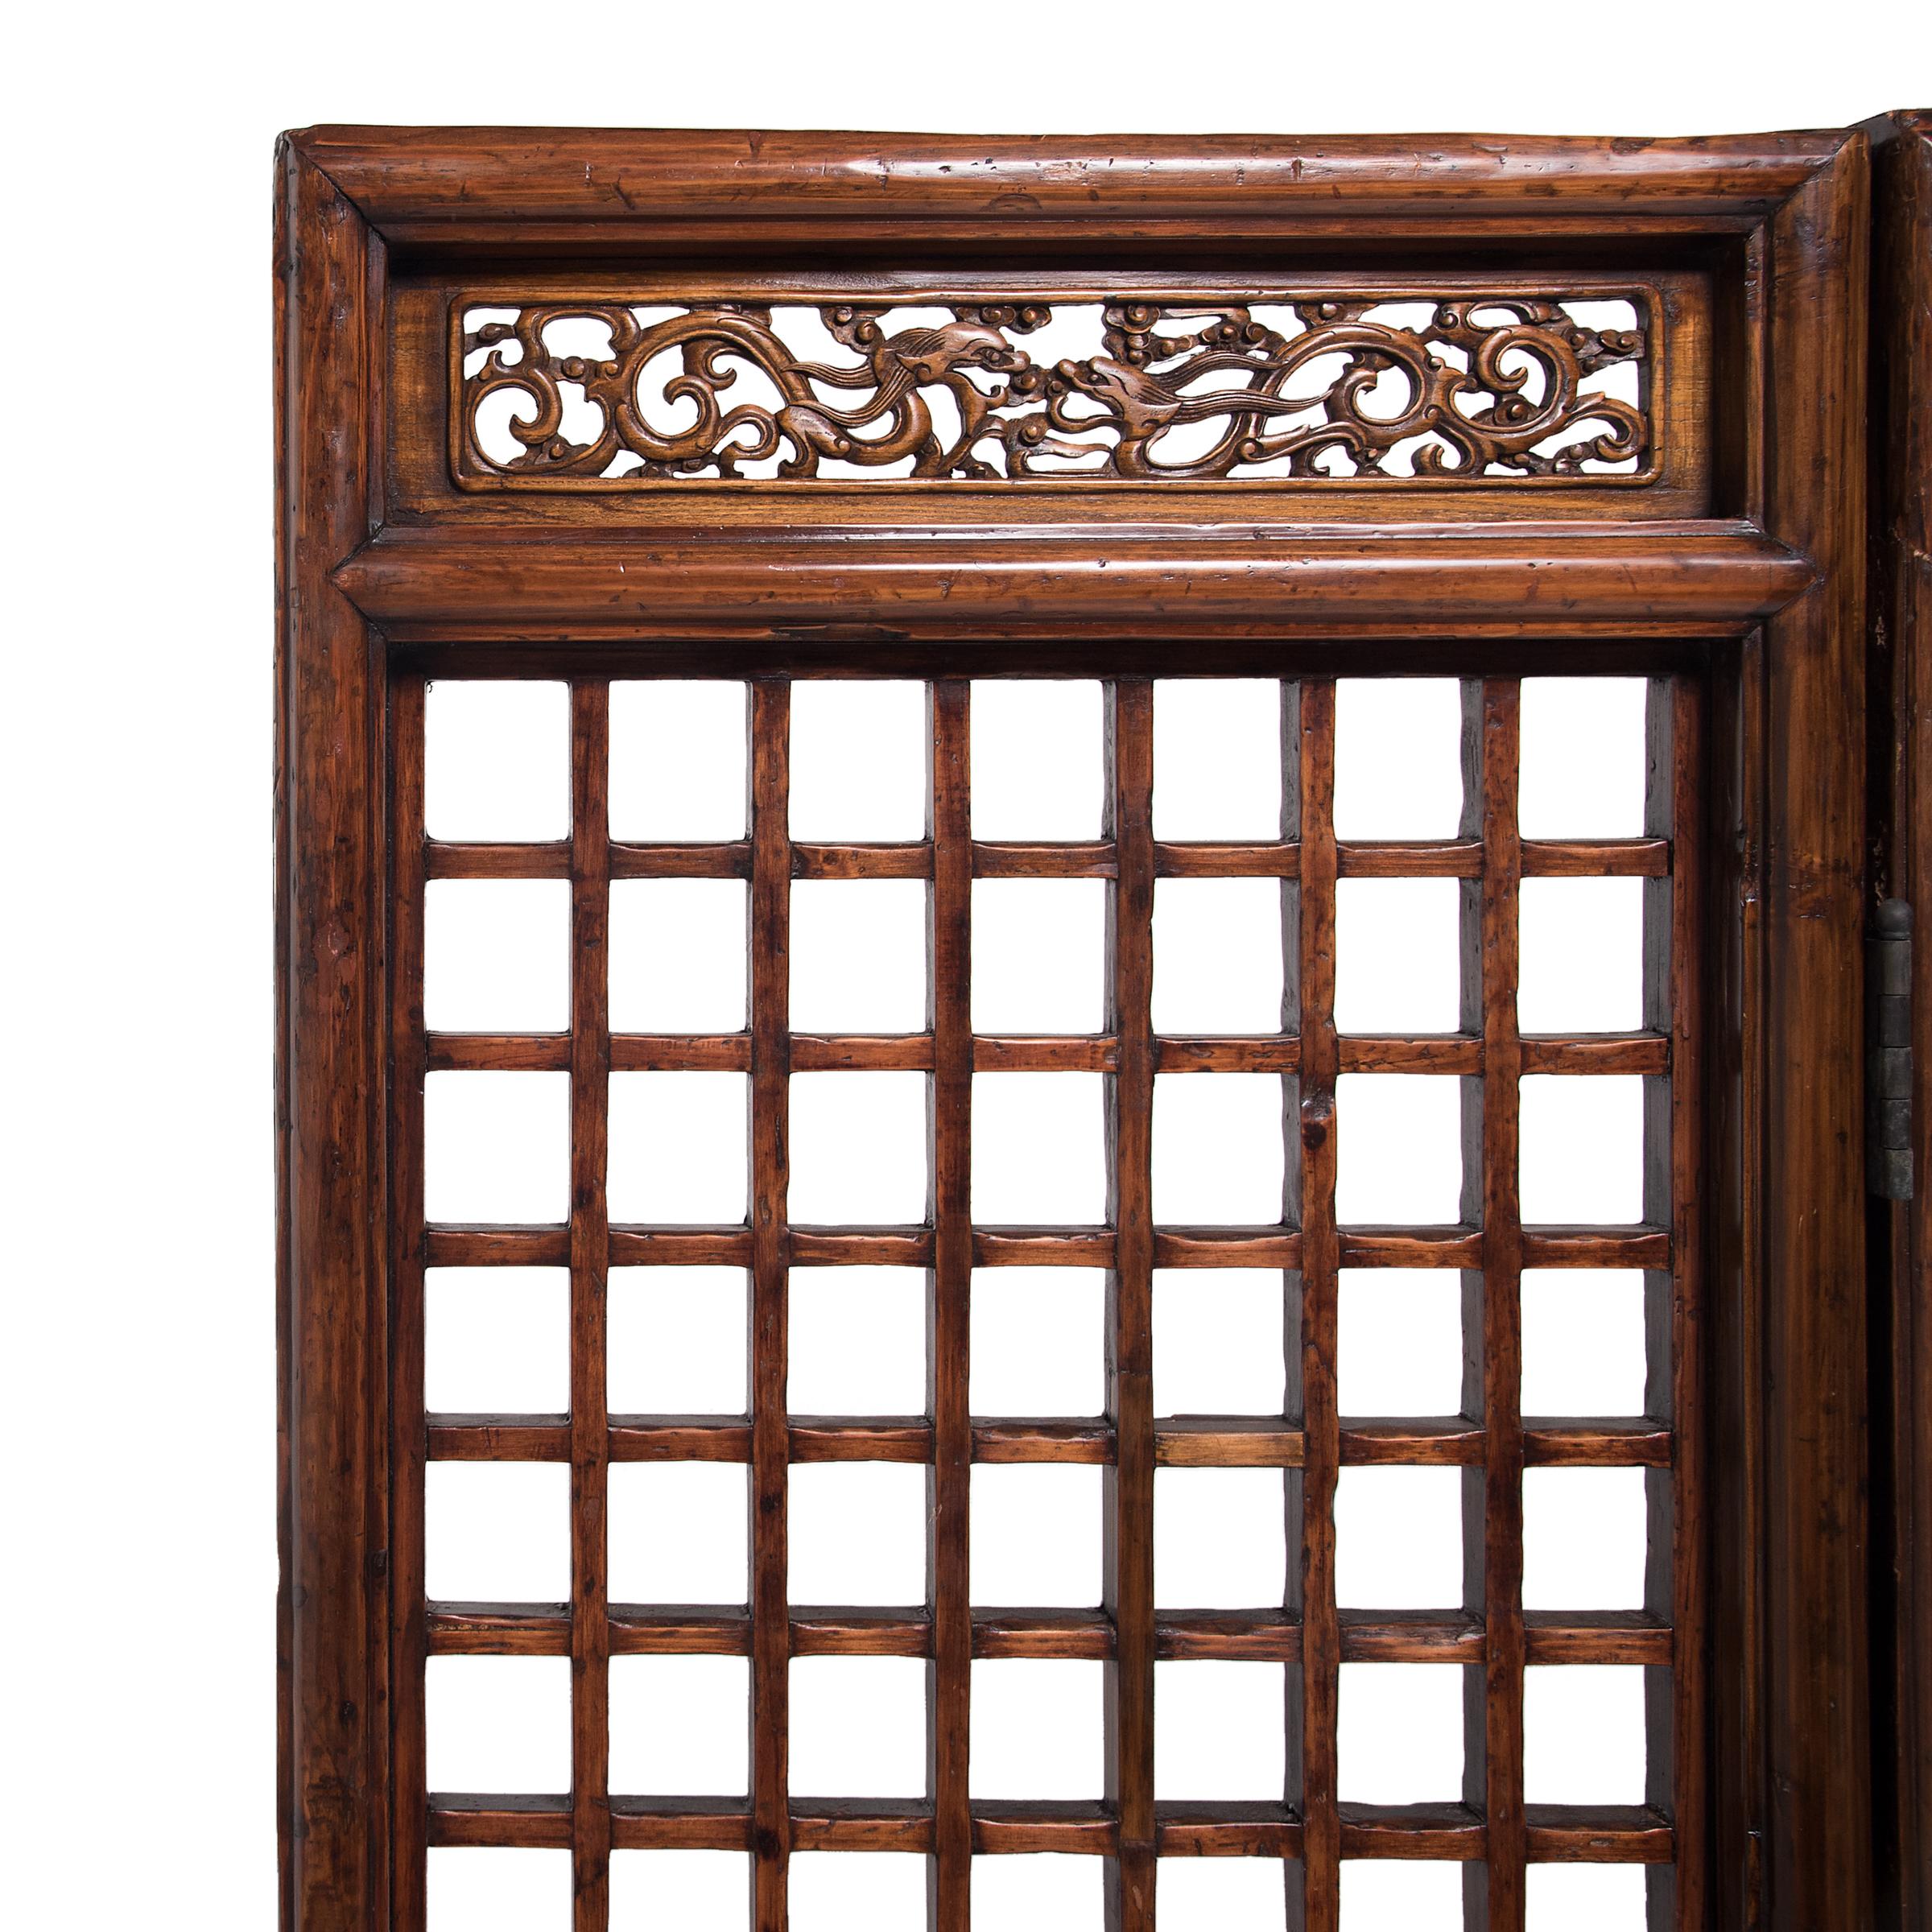 Qing Chinese Three Panel Lattice Screen with Dragon Carvings, c. 1850